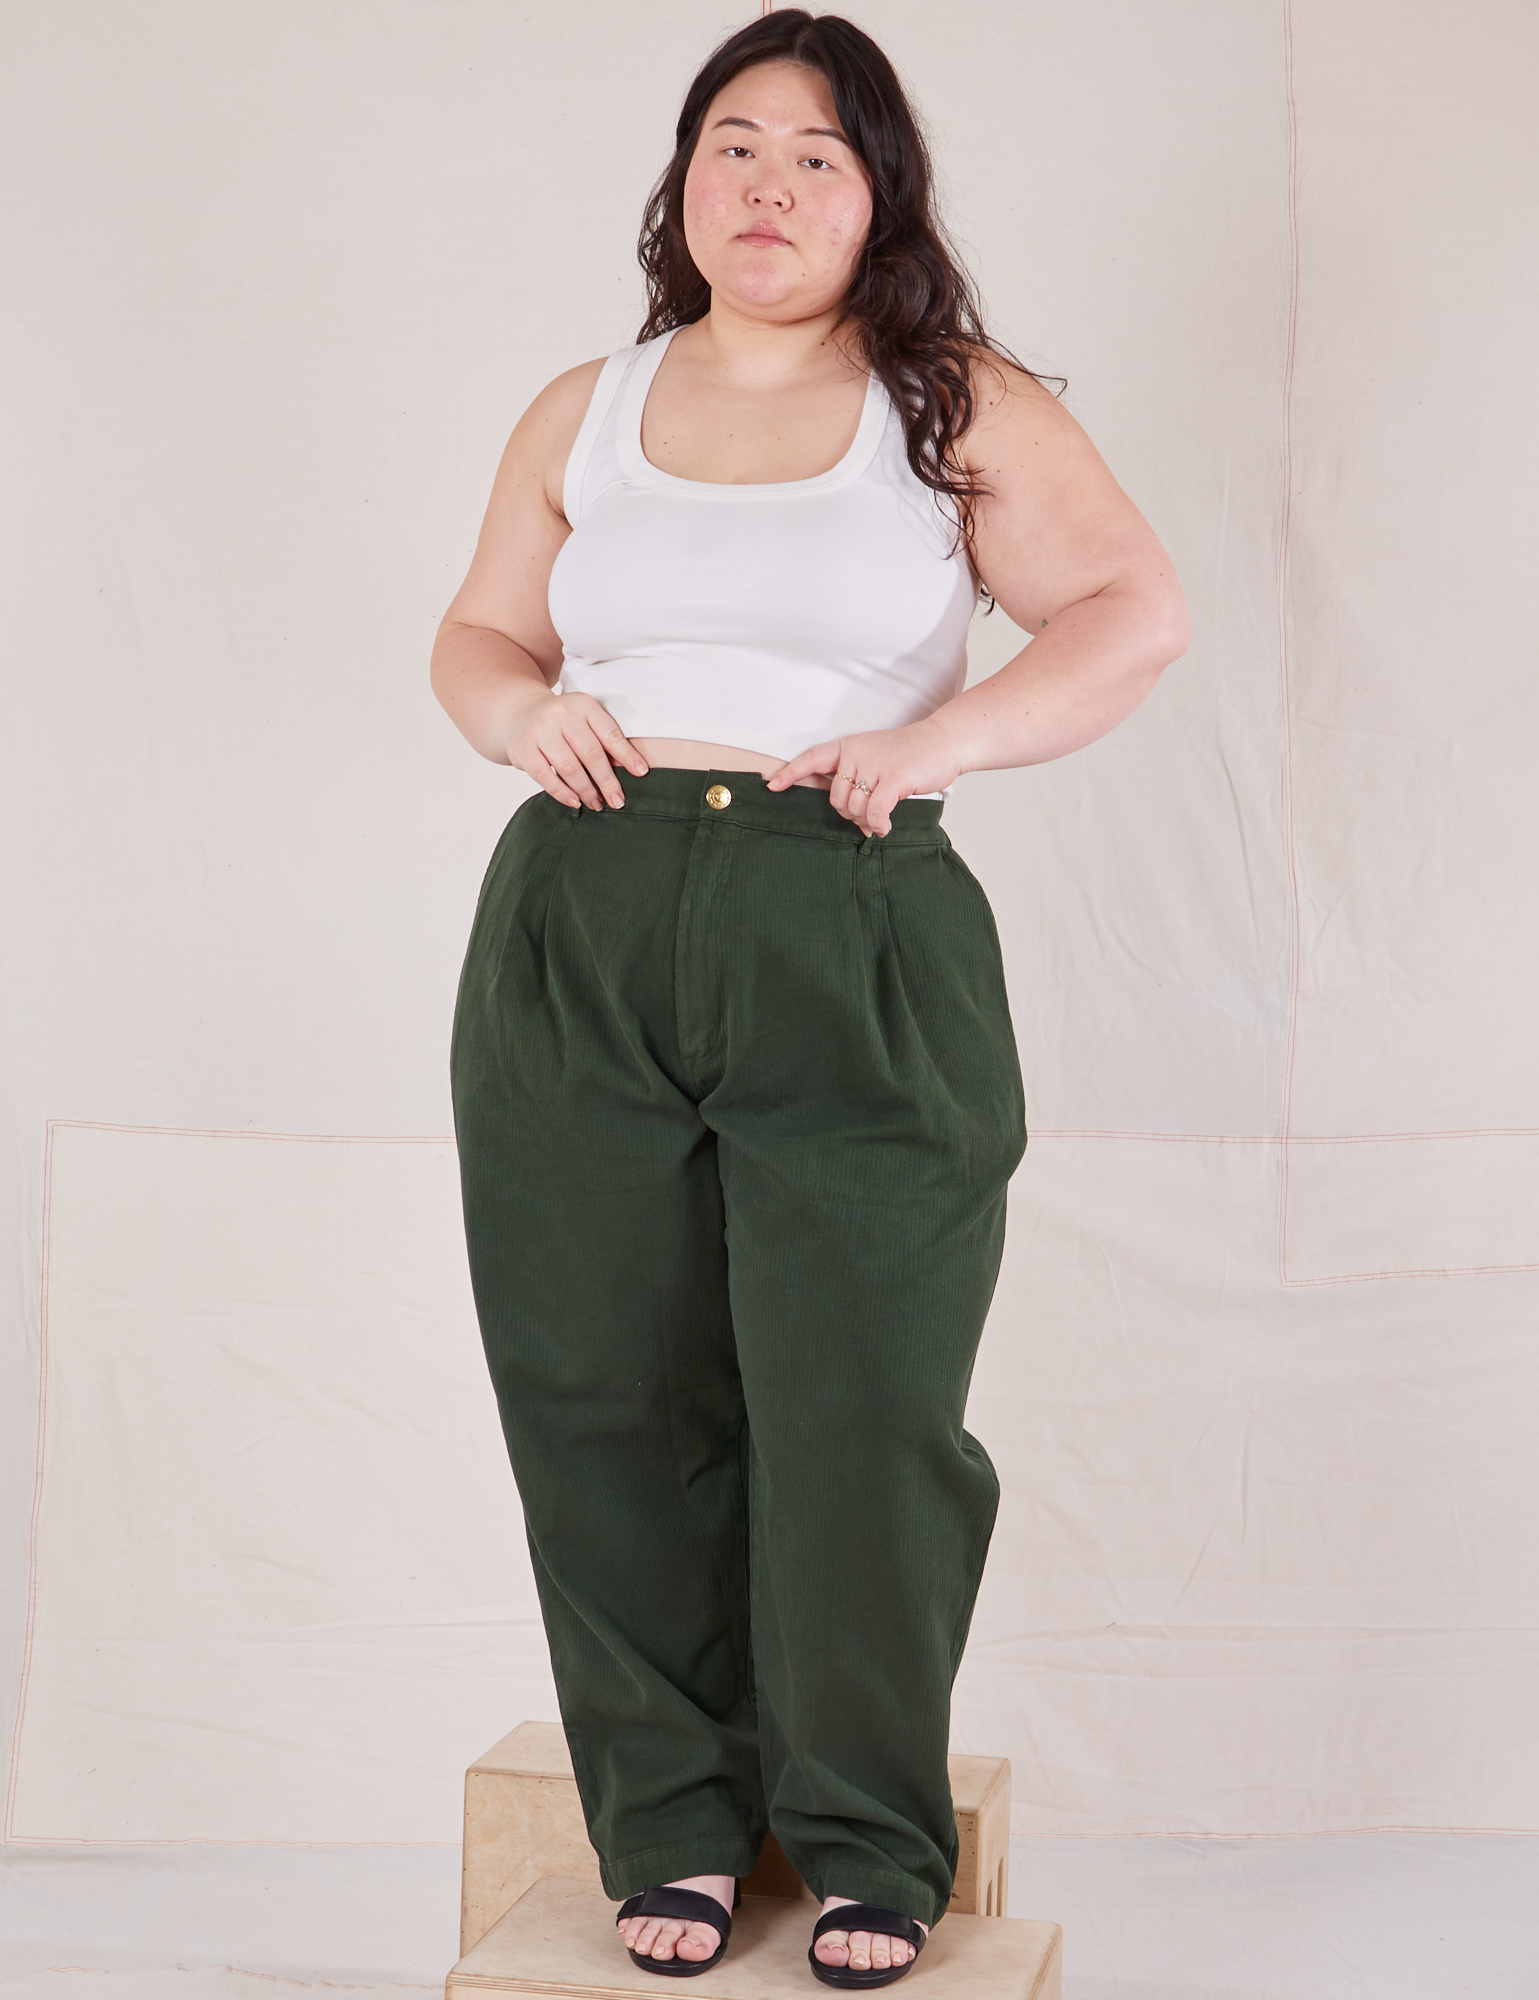 Ashley is wearing Heritage Trousers in Swamp Green and vintage off-white Cropped Tank Top